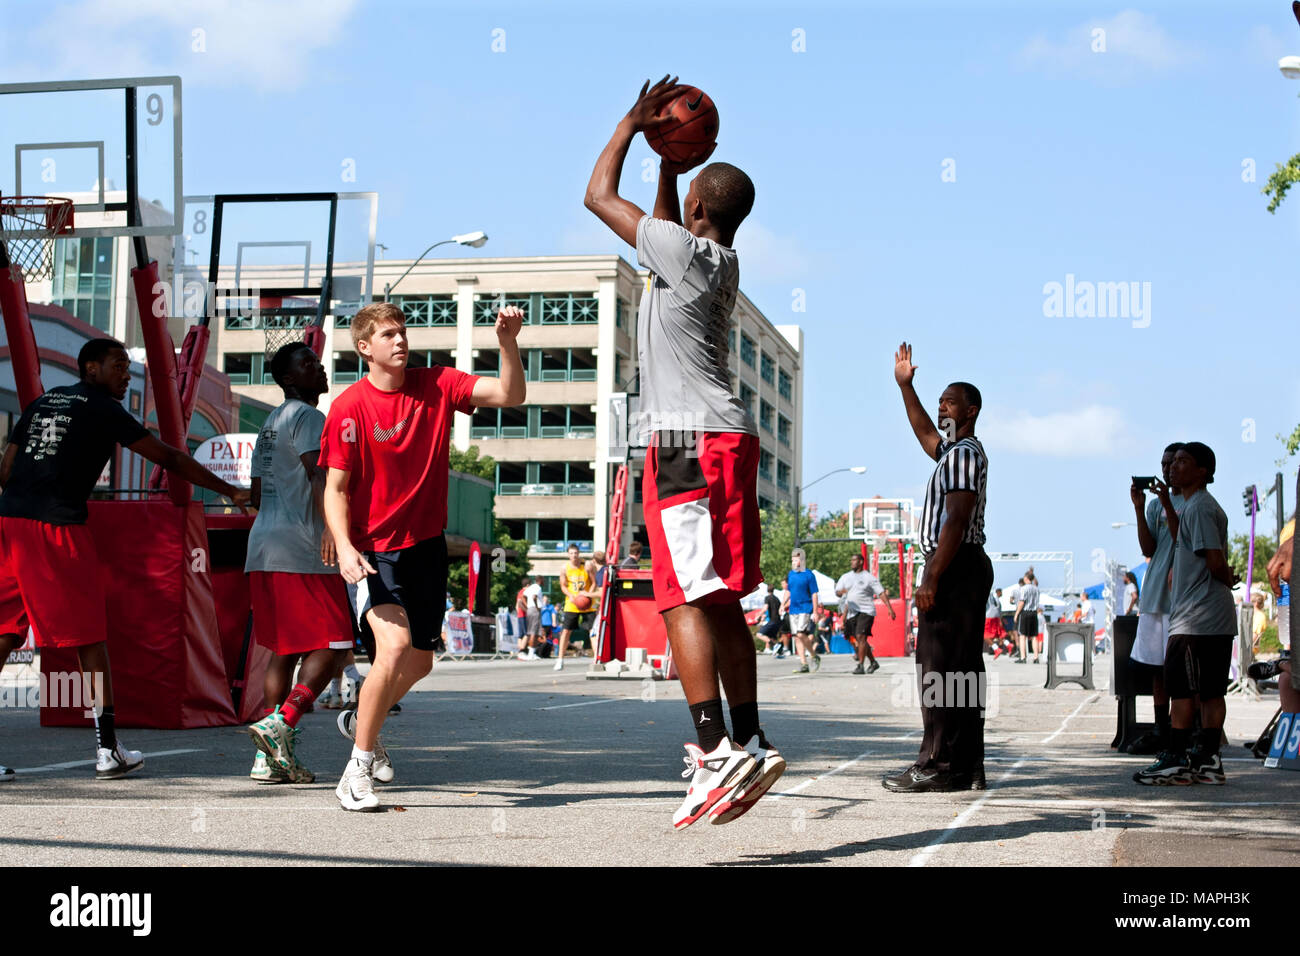 A young man shoots a jump shot in a 3-on-3 basketball tournament held on the streets of downtown Athens, on August 24, 2013 in Athens, GA. Stock Photo